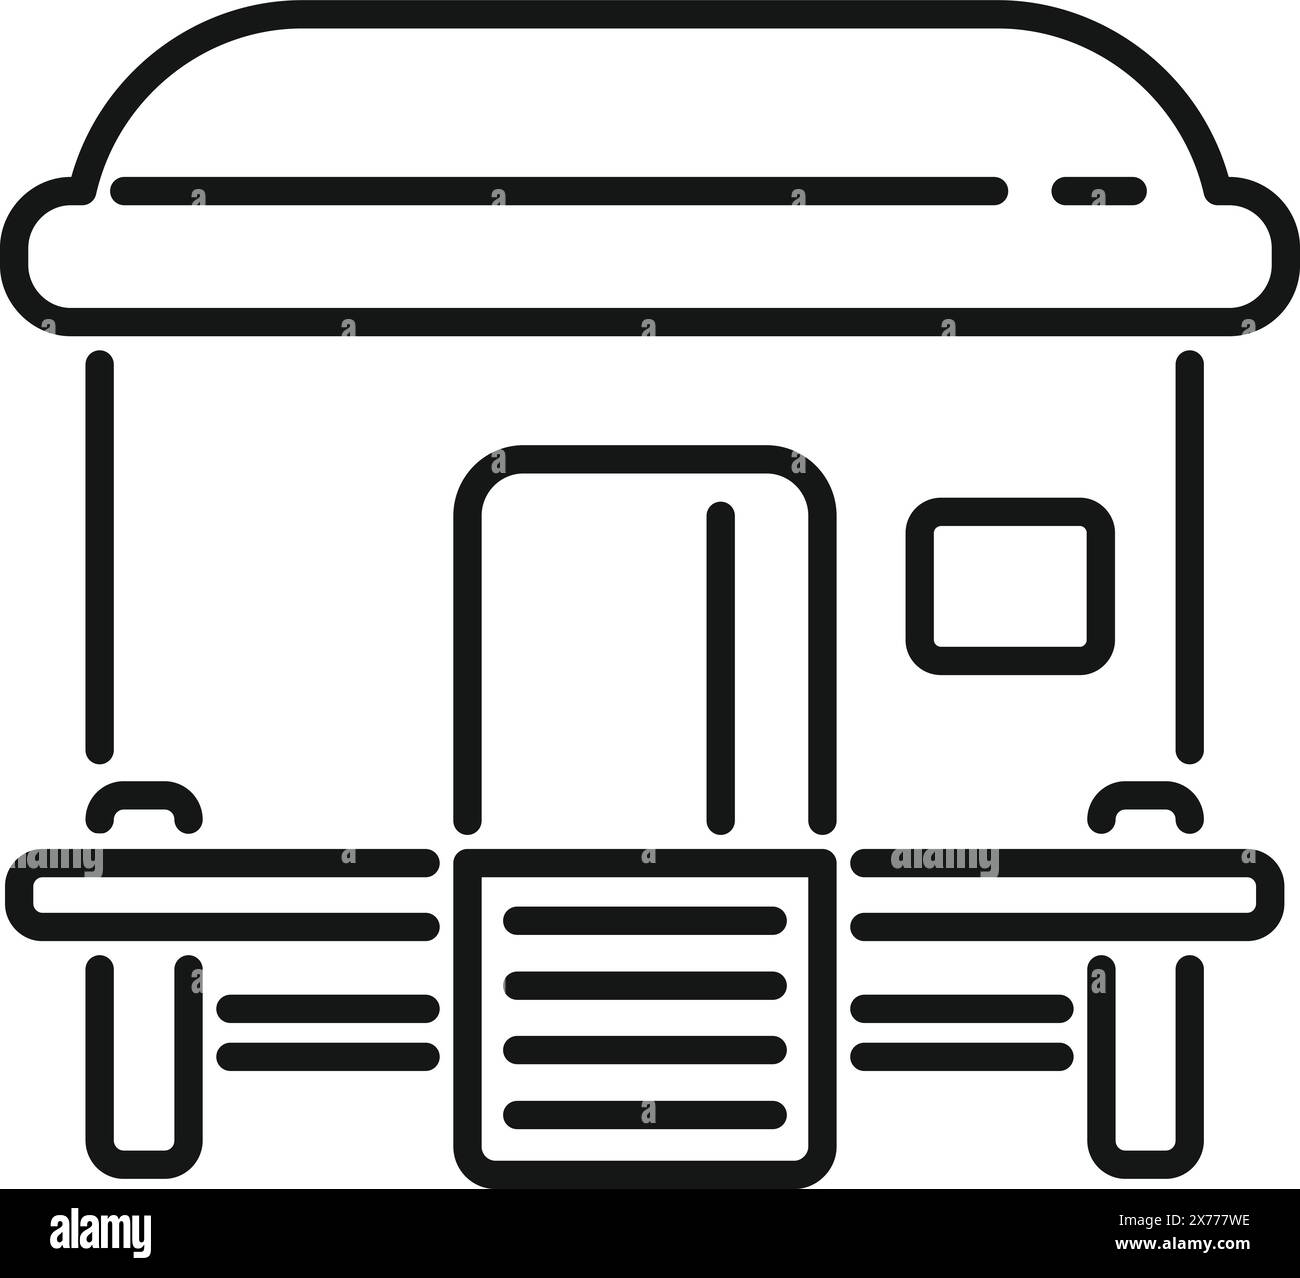 Simple, minimalistic line art illustration of a bus stop, suitable for various design uses Stock Vector